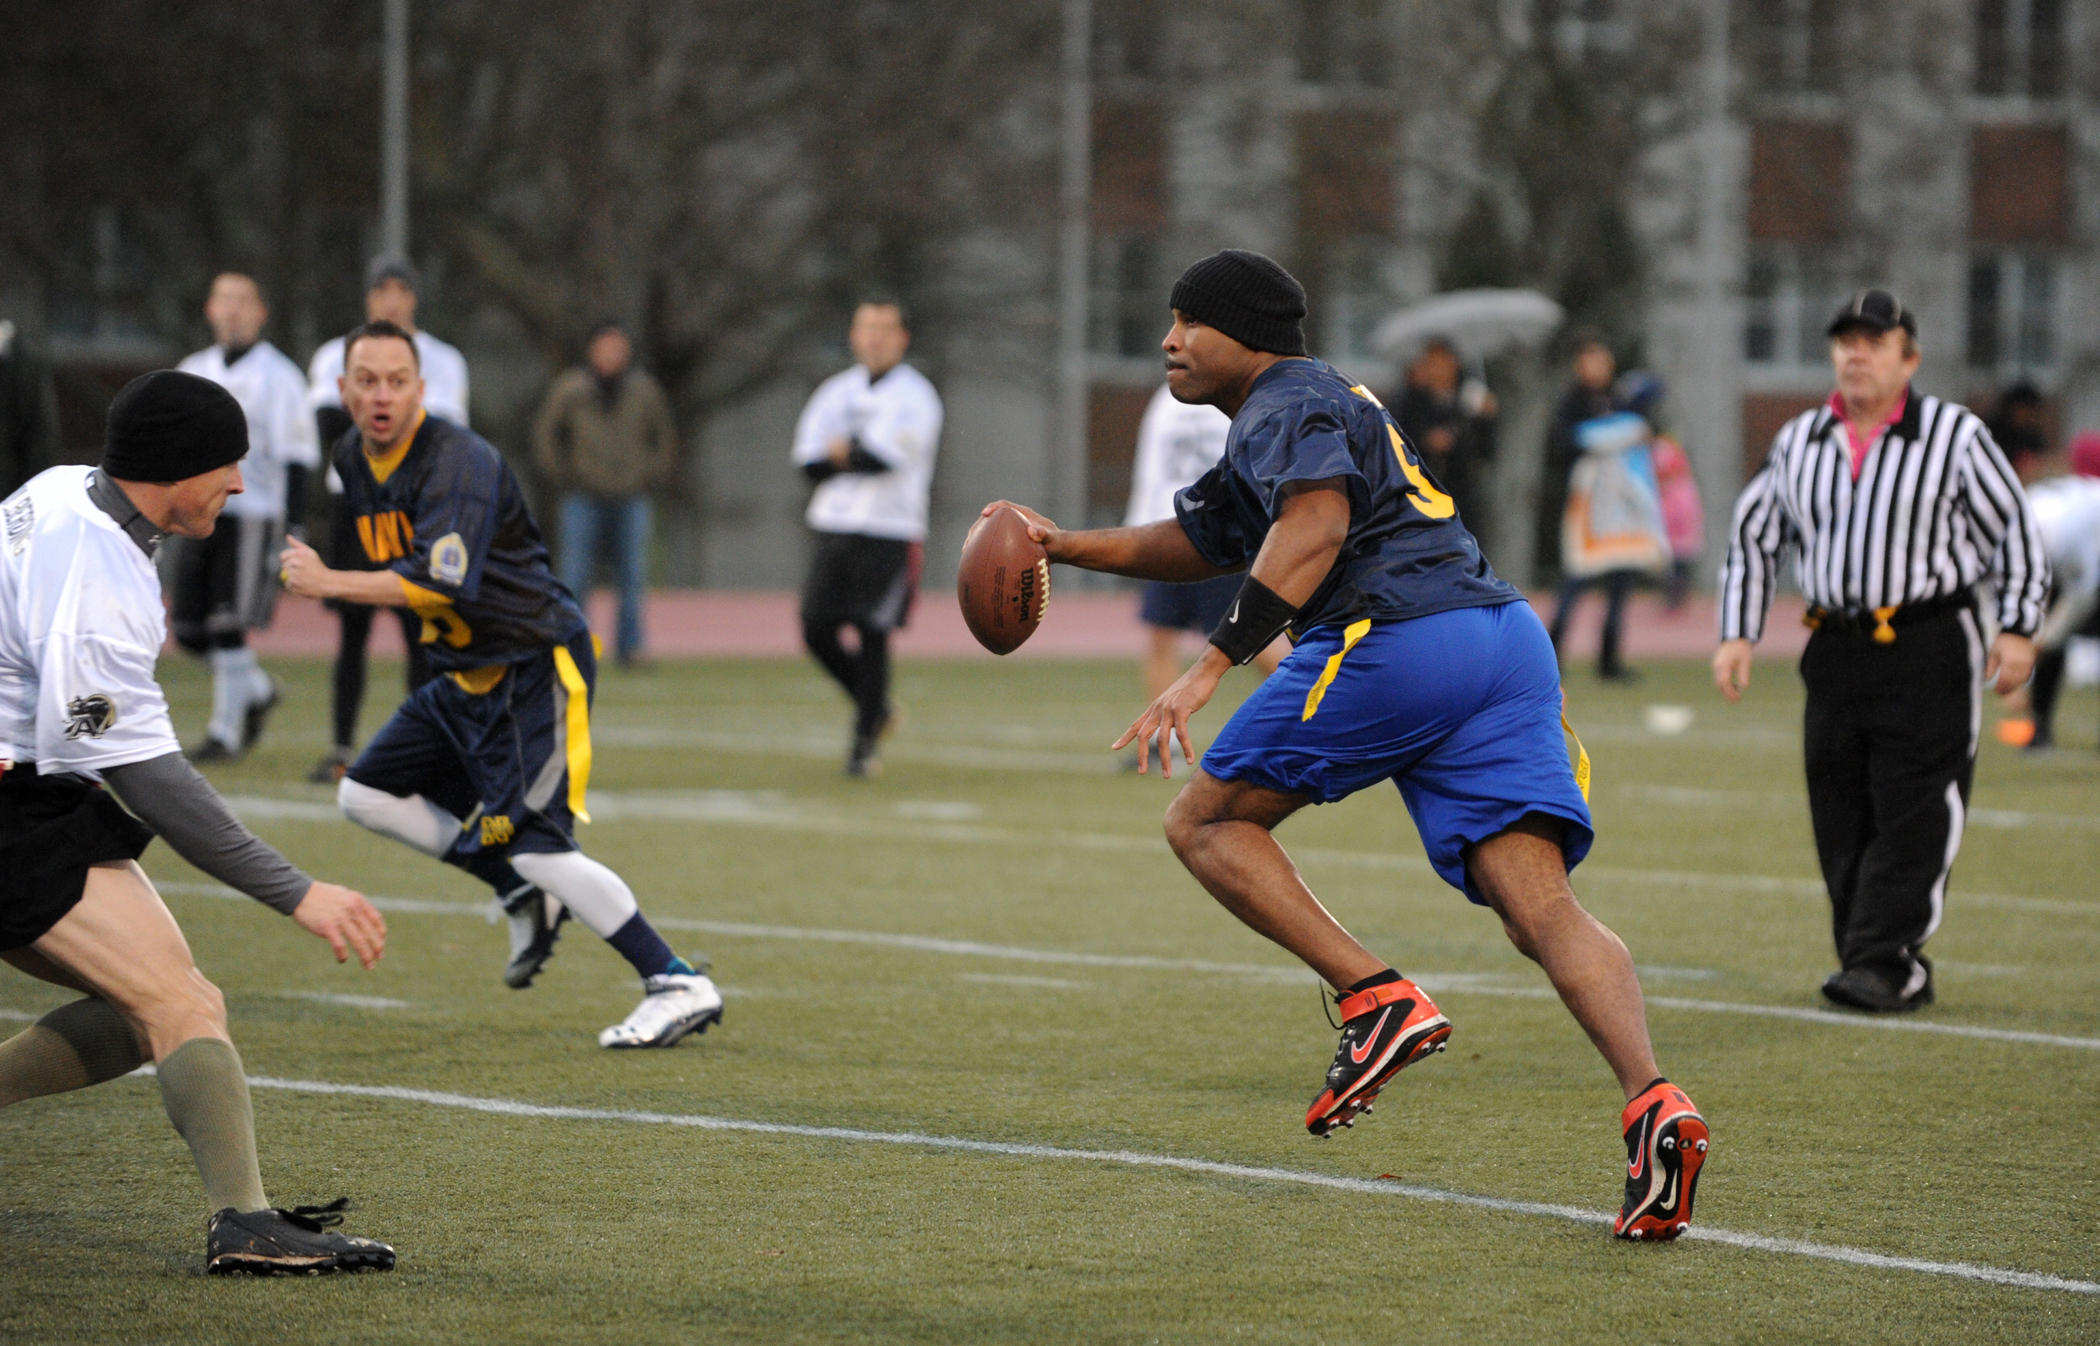 131206-N-PX557-075 NEWPORT, R.I. (Dec. 6, 2013) Lt. Cmdr. Alex Hampton, a student attending U.S. Naval War College (NWC), scrambles to make a pass during an Army-Navy flag football game at Nimitz Field onboard Naval Station Newport in Newport, R.I. The game was held as a precursor to the college football rivalry game between U.S. Naval Academy, Navy Midshipmen, and U.S. Military Academy, Army Black Knights, scheduled for Dec. 14, at Lincoln Financial Field in Philadelphia, Pa. The NWC Navy flag football team triumphed over the NWC Army team with a final score of 24-0. (U.S. Navy photo by Chief Mass Communication Specialist James E. Foehl/Released)